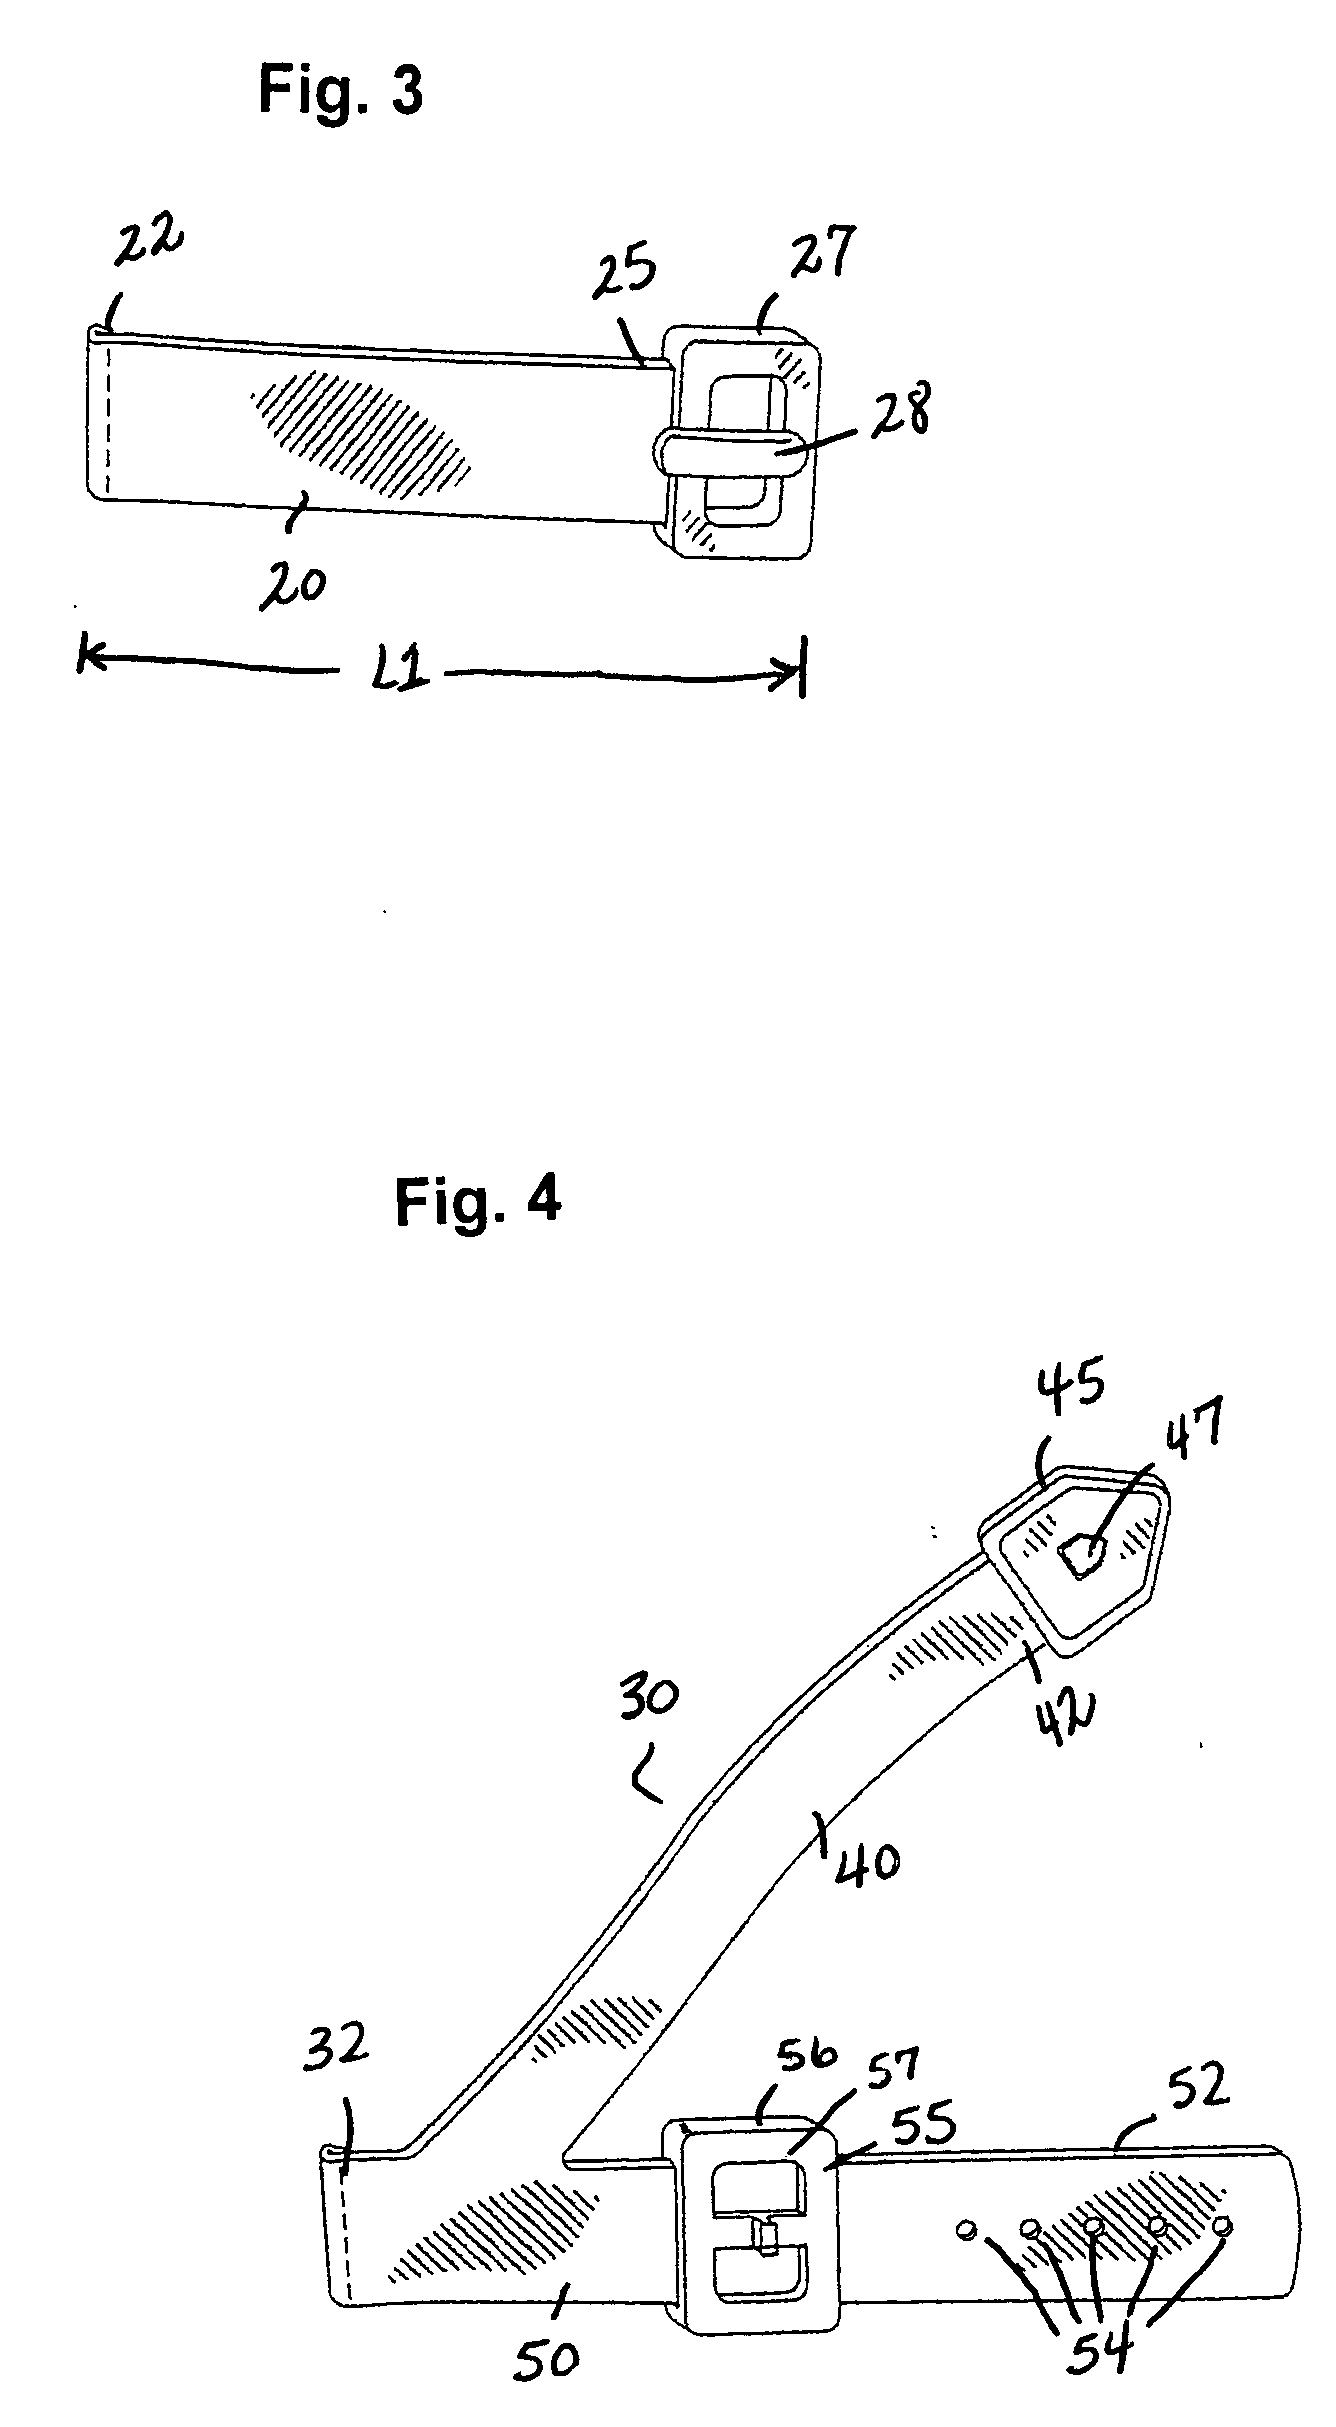 Device hoding structure